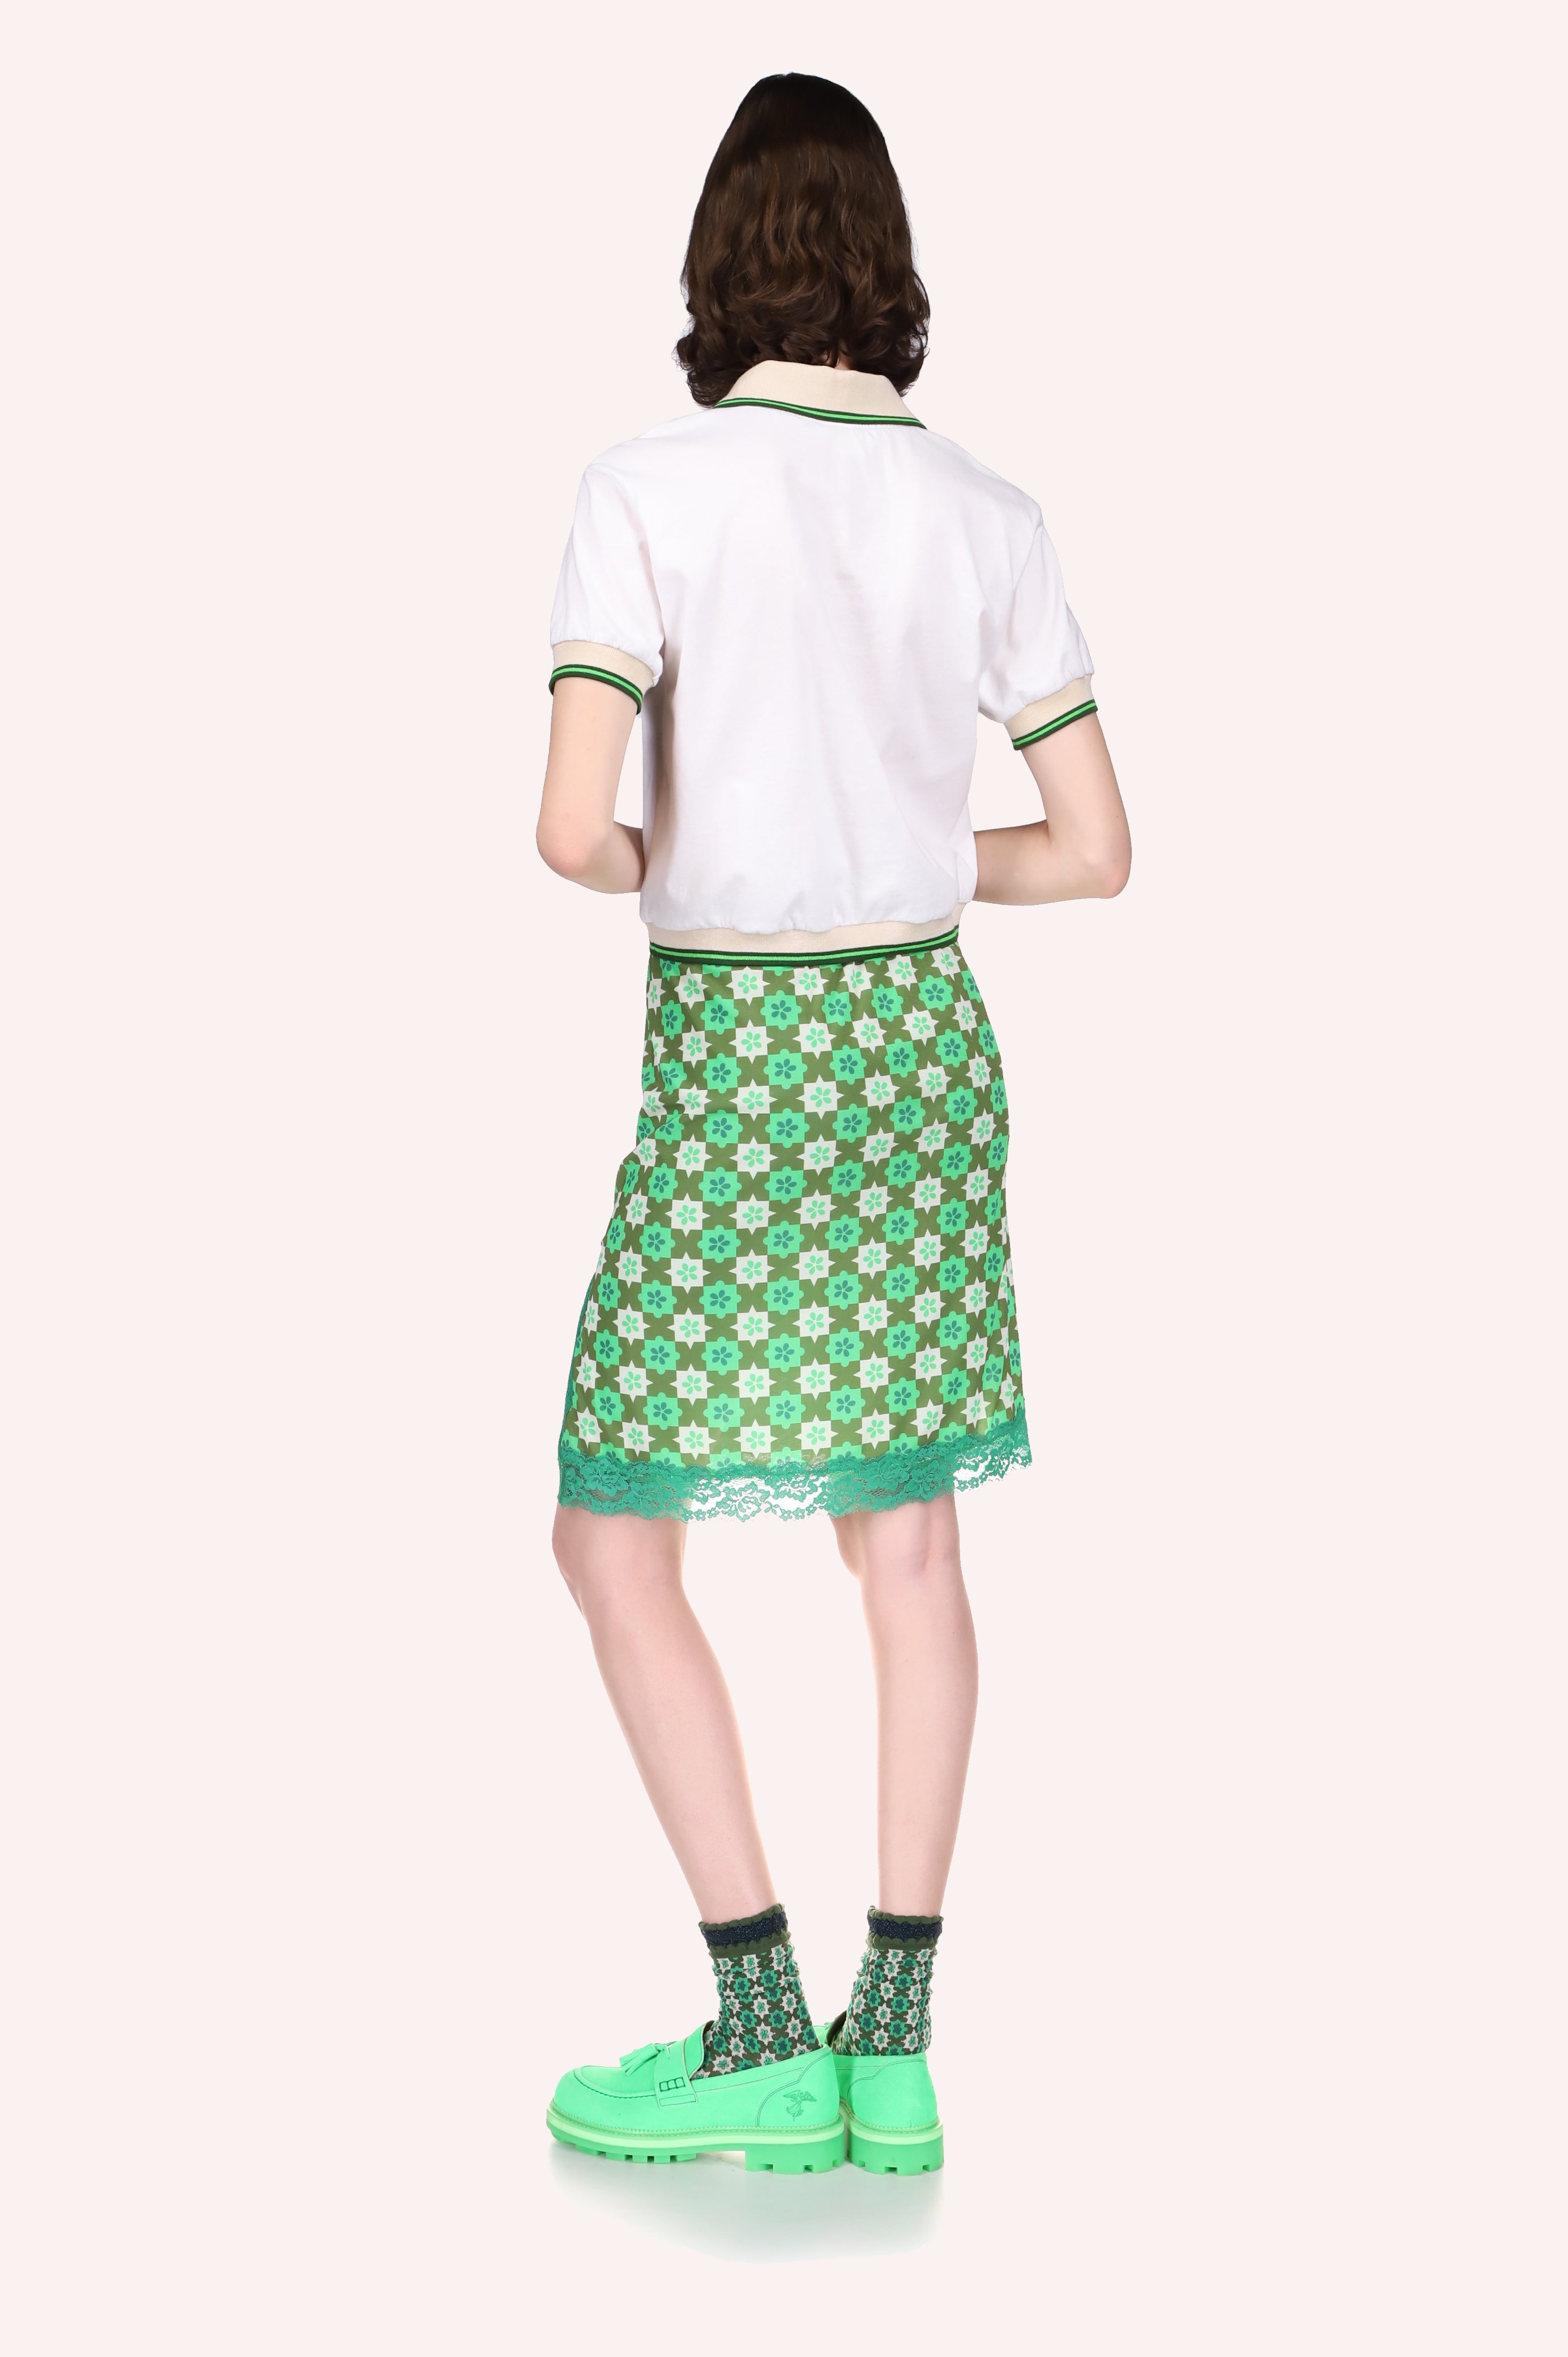 Utopian Gingham Mesh Skirt Glo Green, from the back the green lace at the bottom highlighted the whole pattern